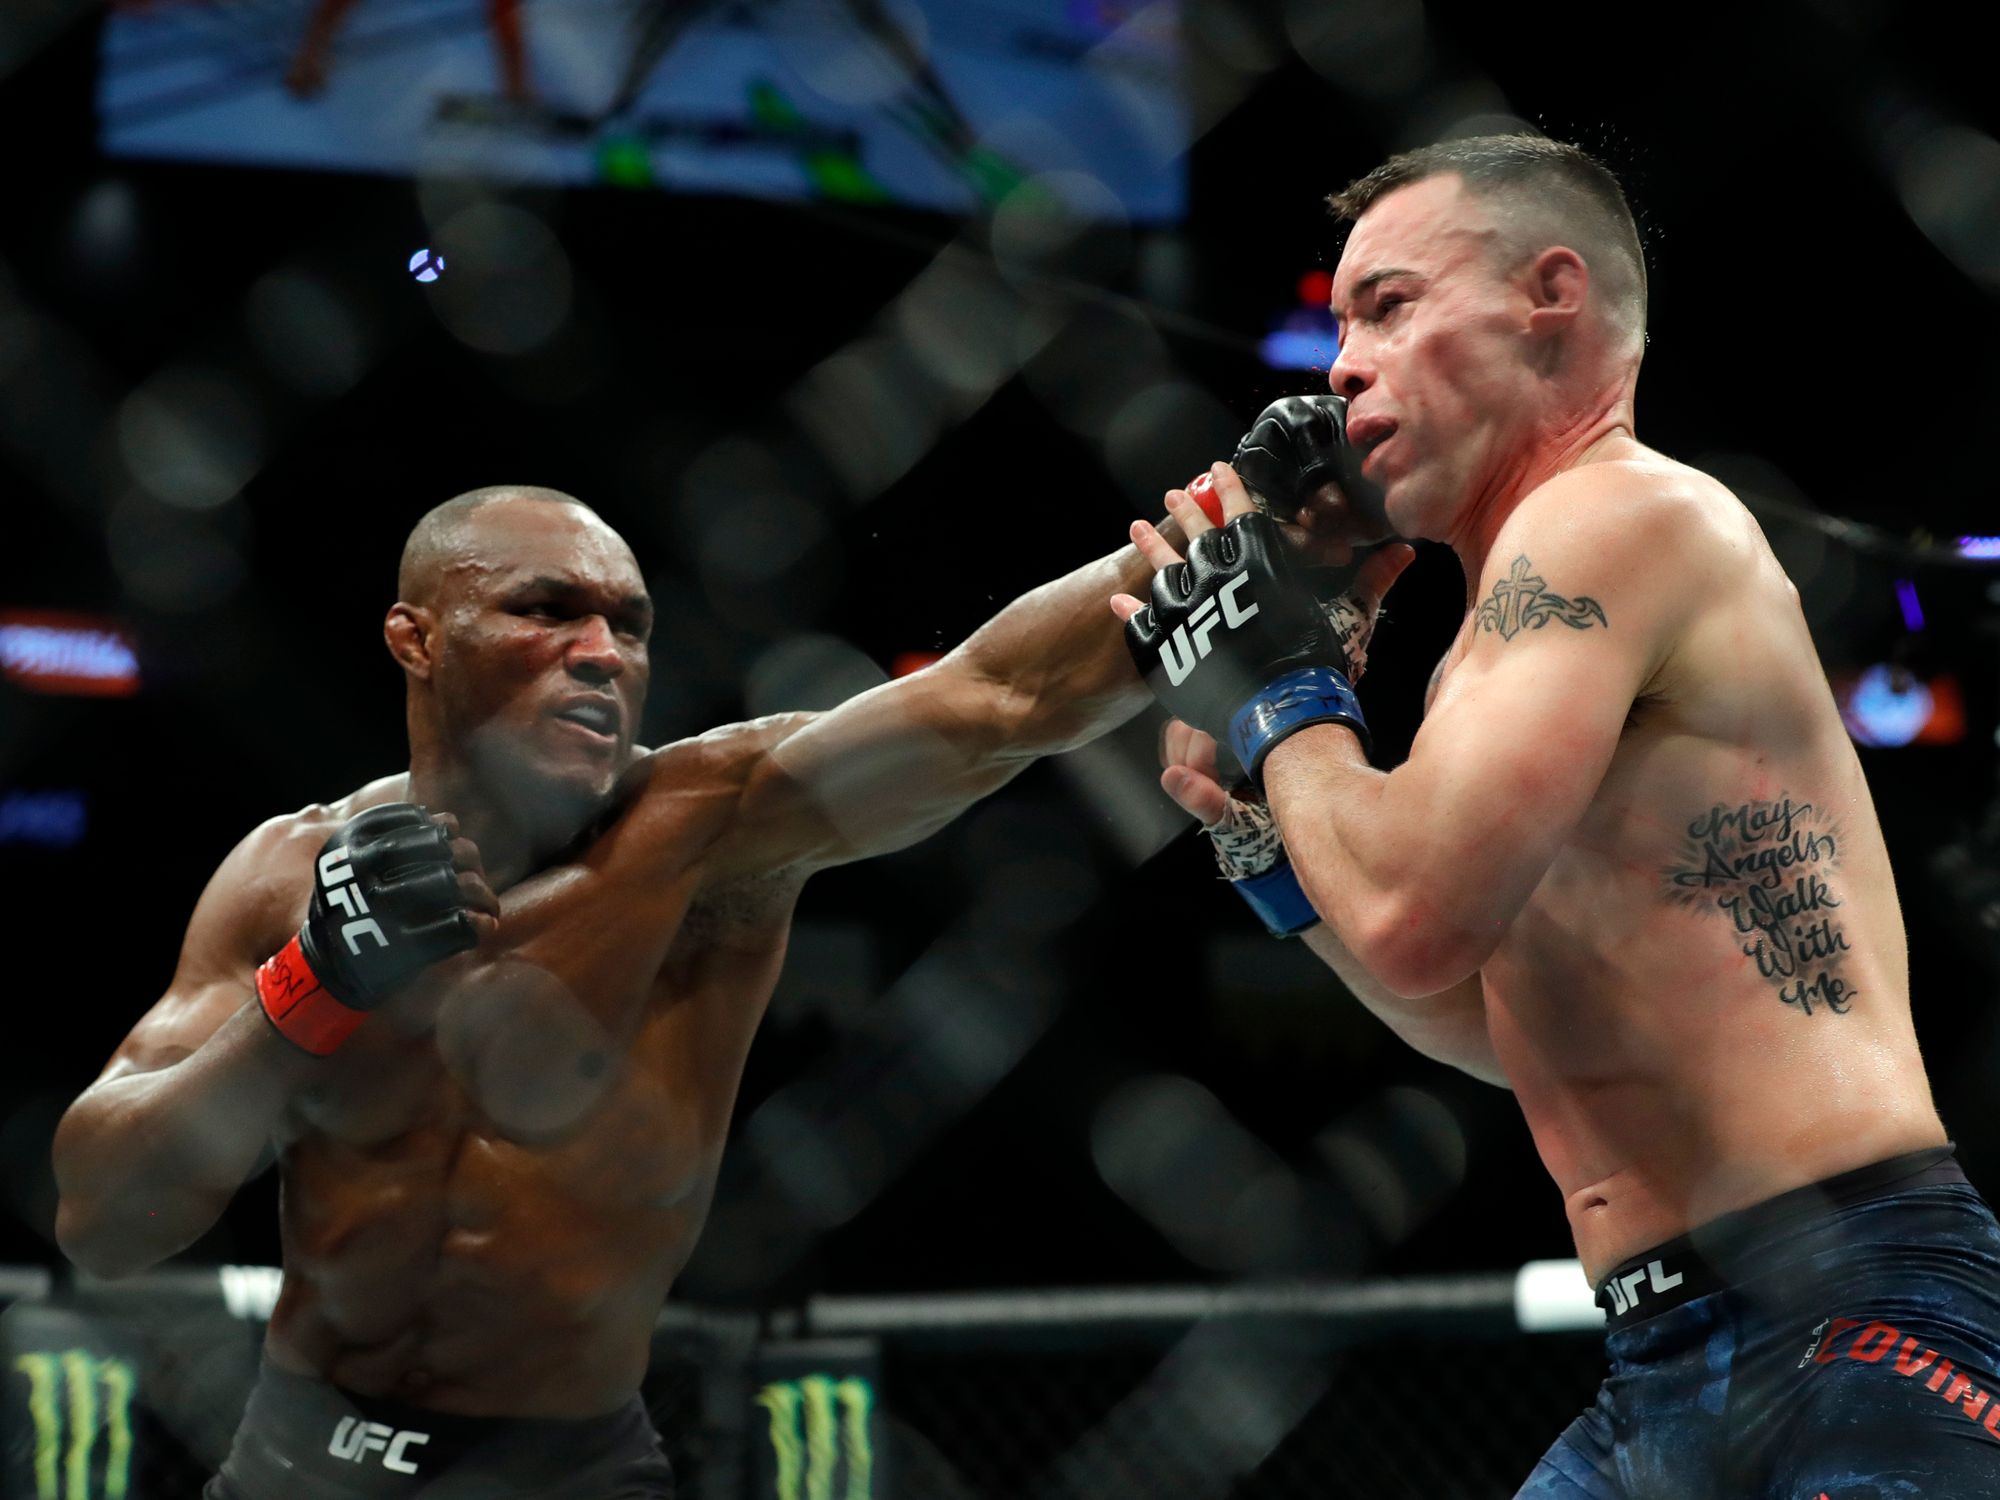 'I’m More American Than Him,' Says Nigerian UFC Champion Kamaru Usman After Crushing MAGA-Supporting Opponent